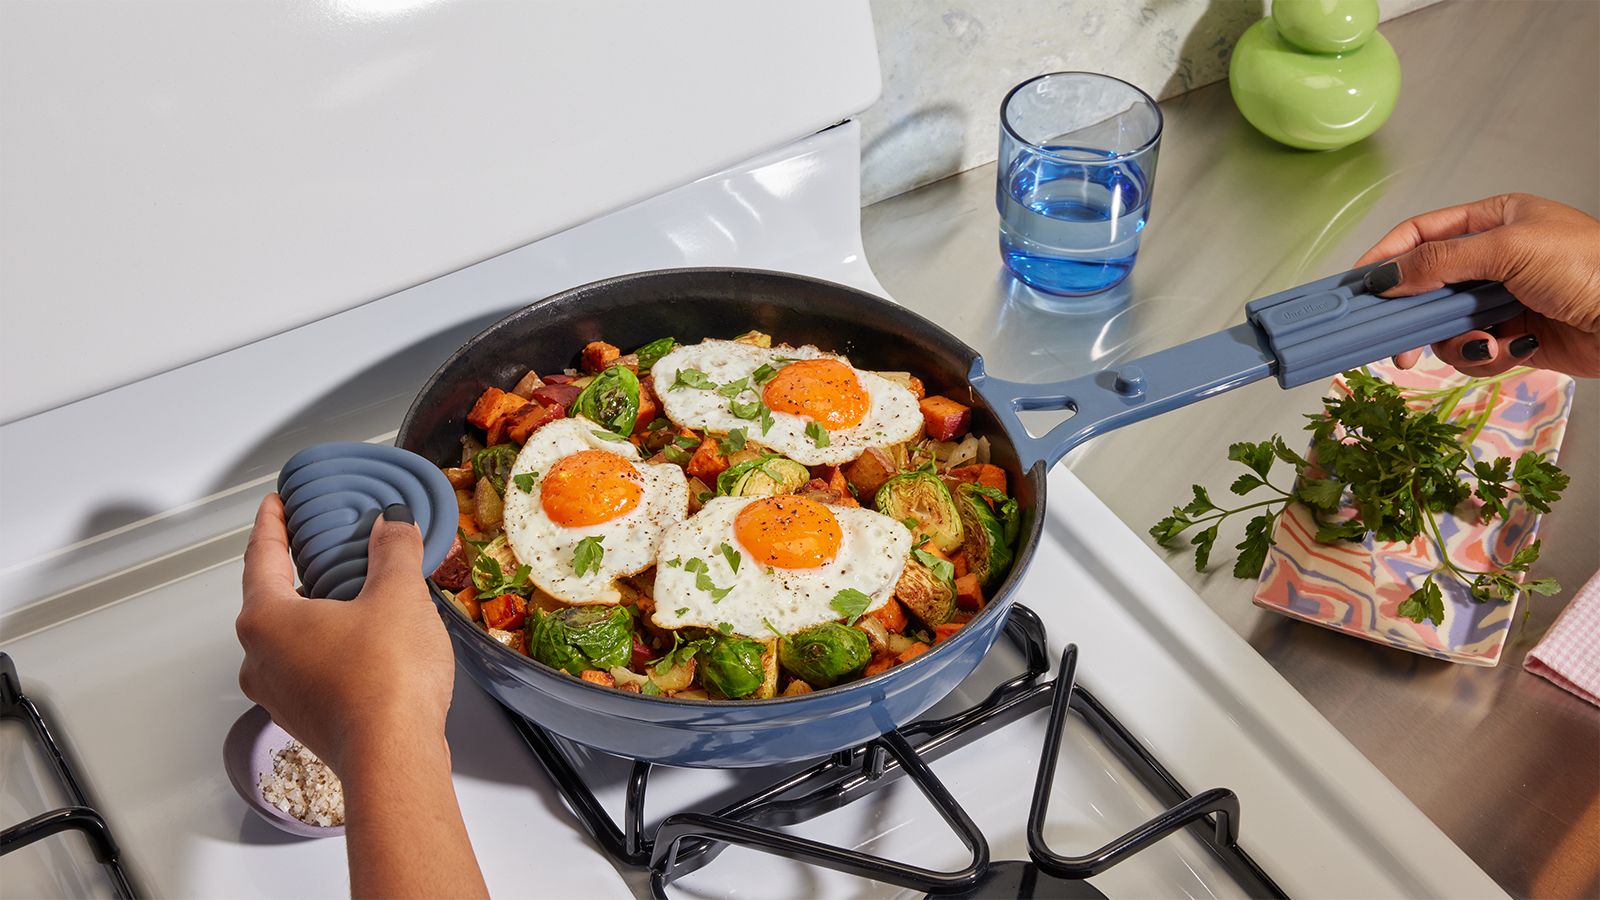 Can This Cult-Favourite, 8-in-1 Pan Truly Do It All?